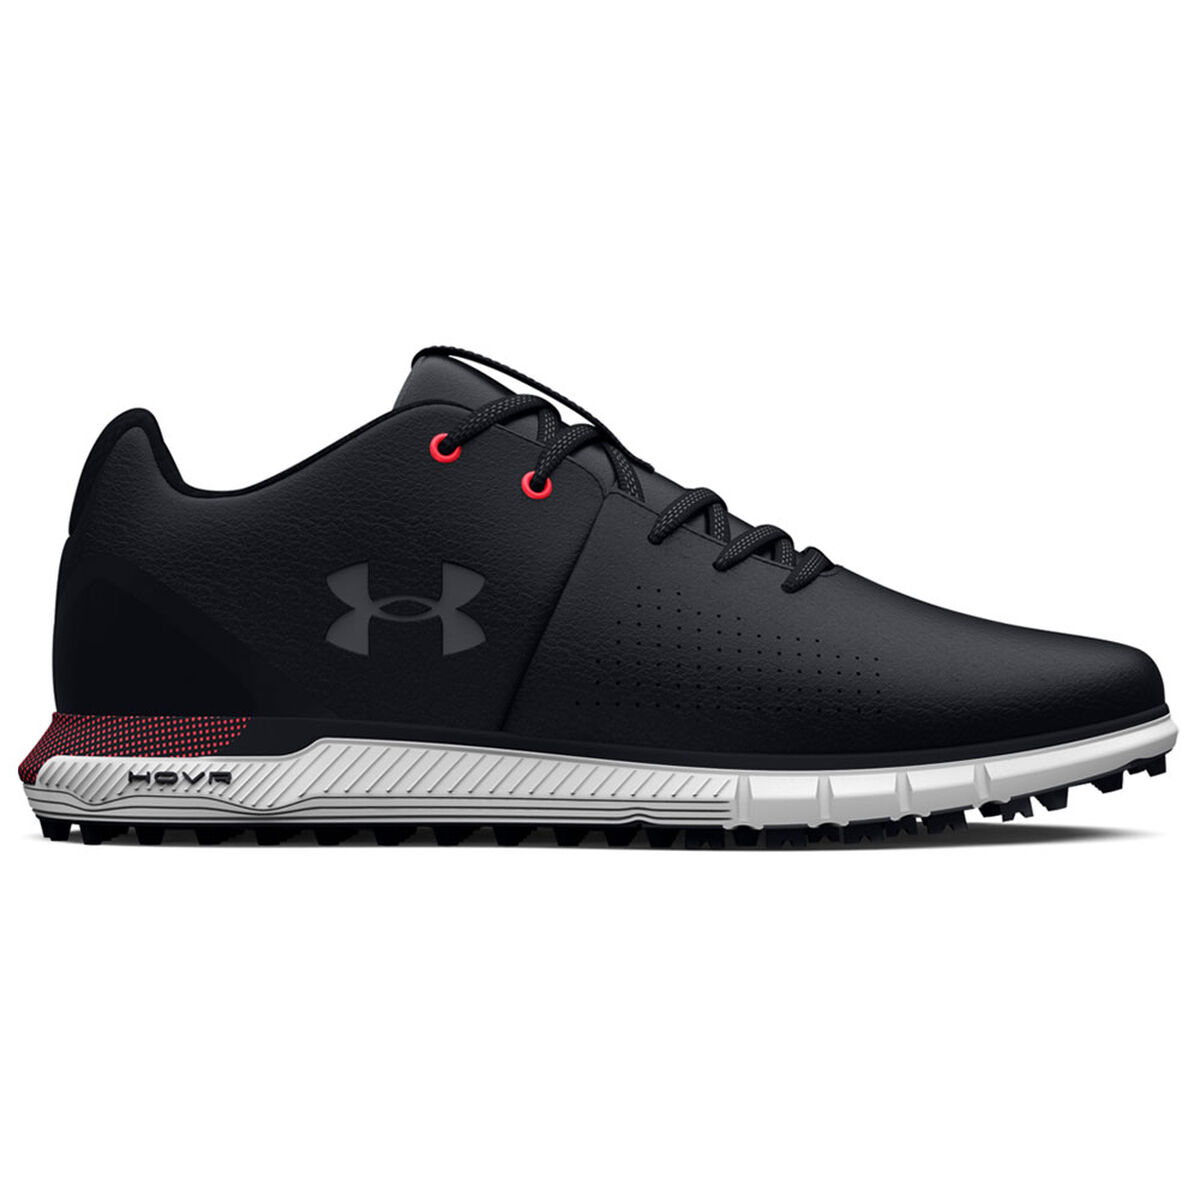 Under Armour Men’s HOVR Fade 2 Spikeless Golf Shoes, Mens, Black/black/grey, 9 | American Golf